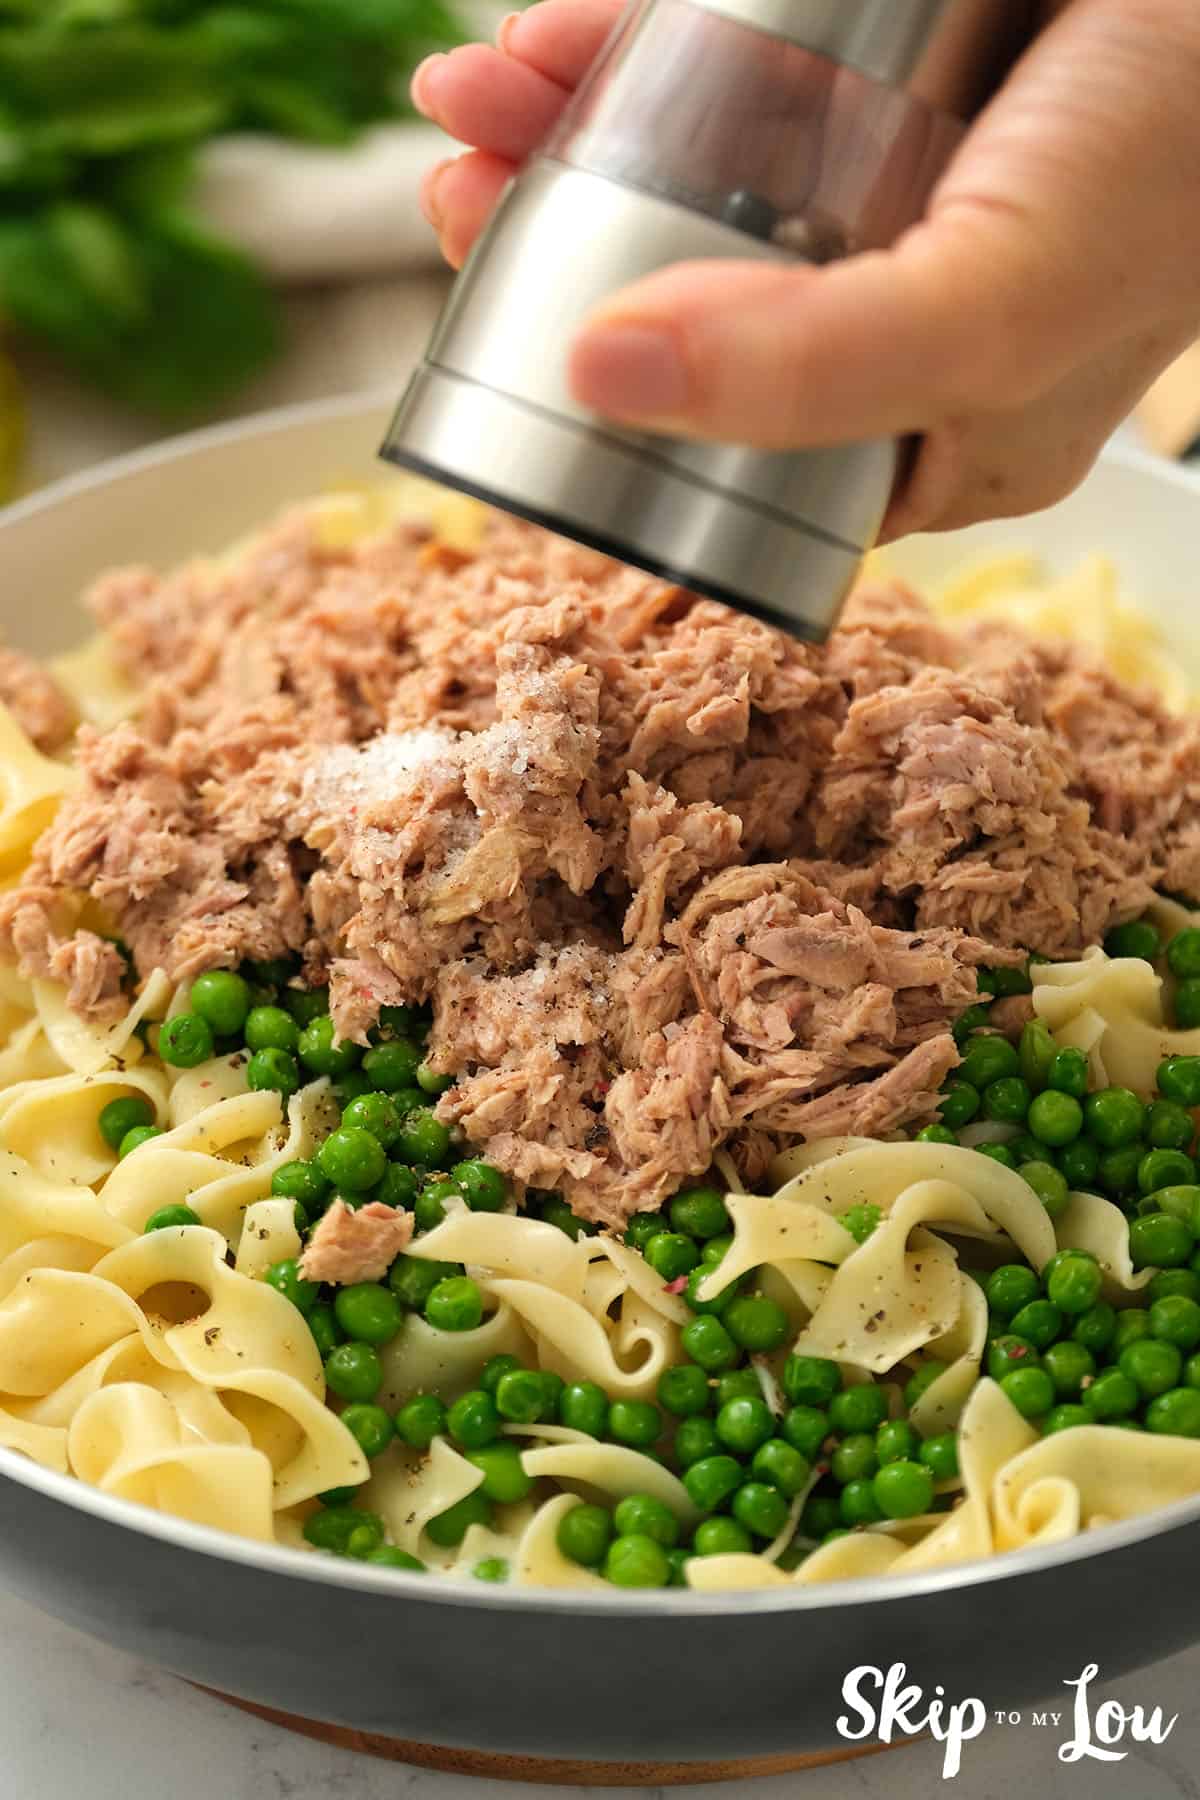 Tuna, peas, and pasta stirred into the cream mixture with ground pepper as a garnish.